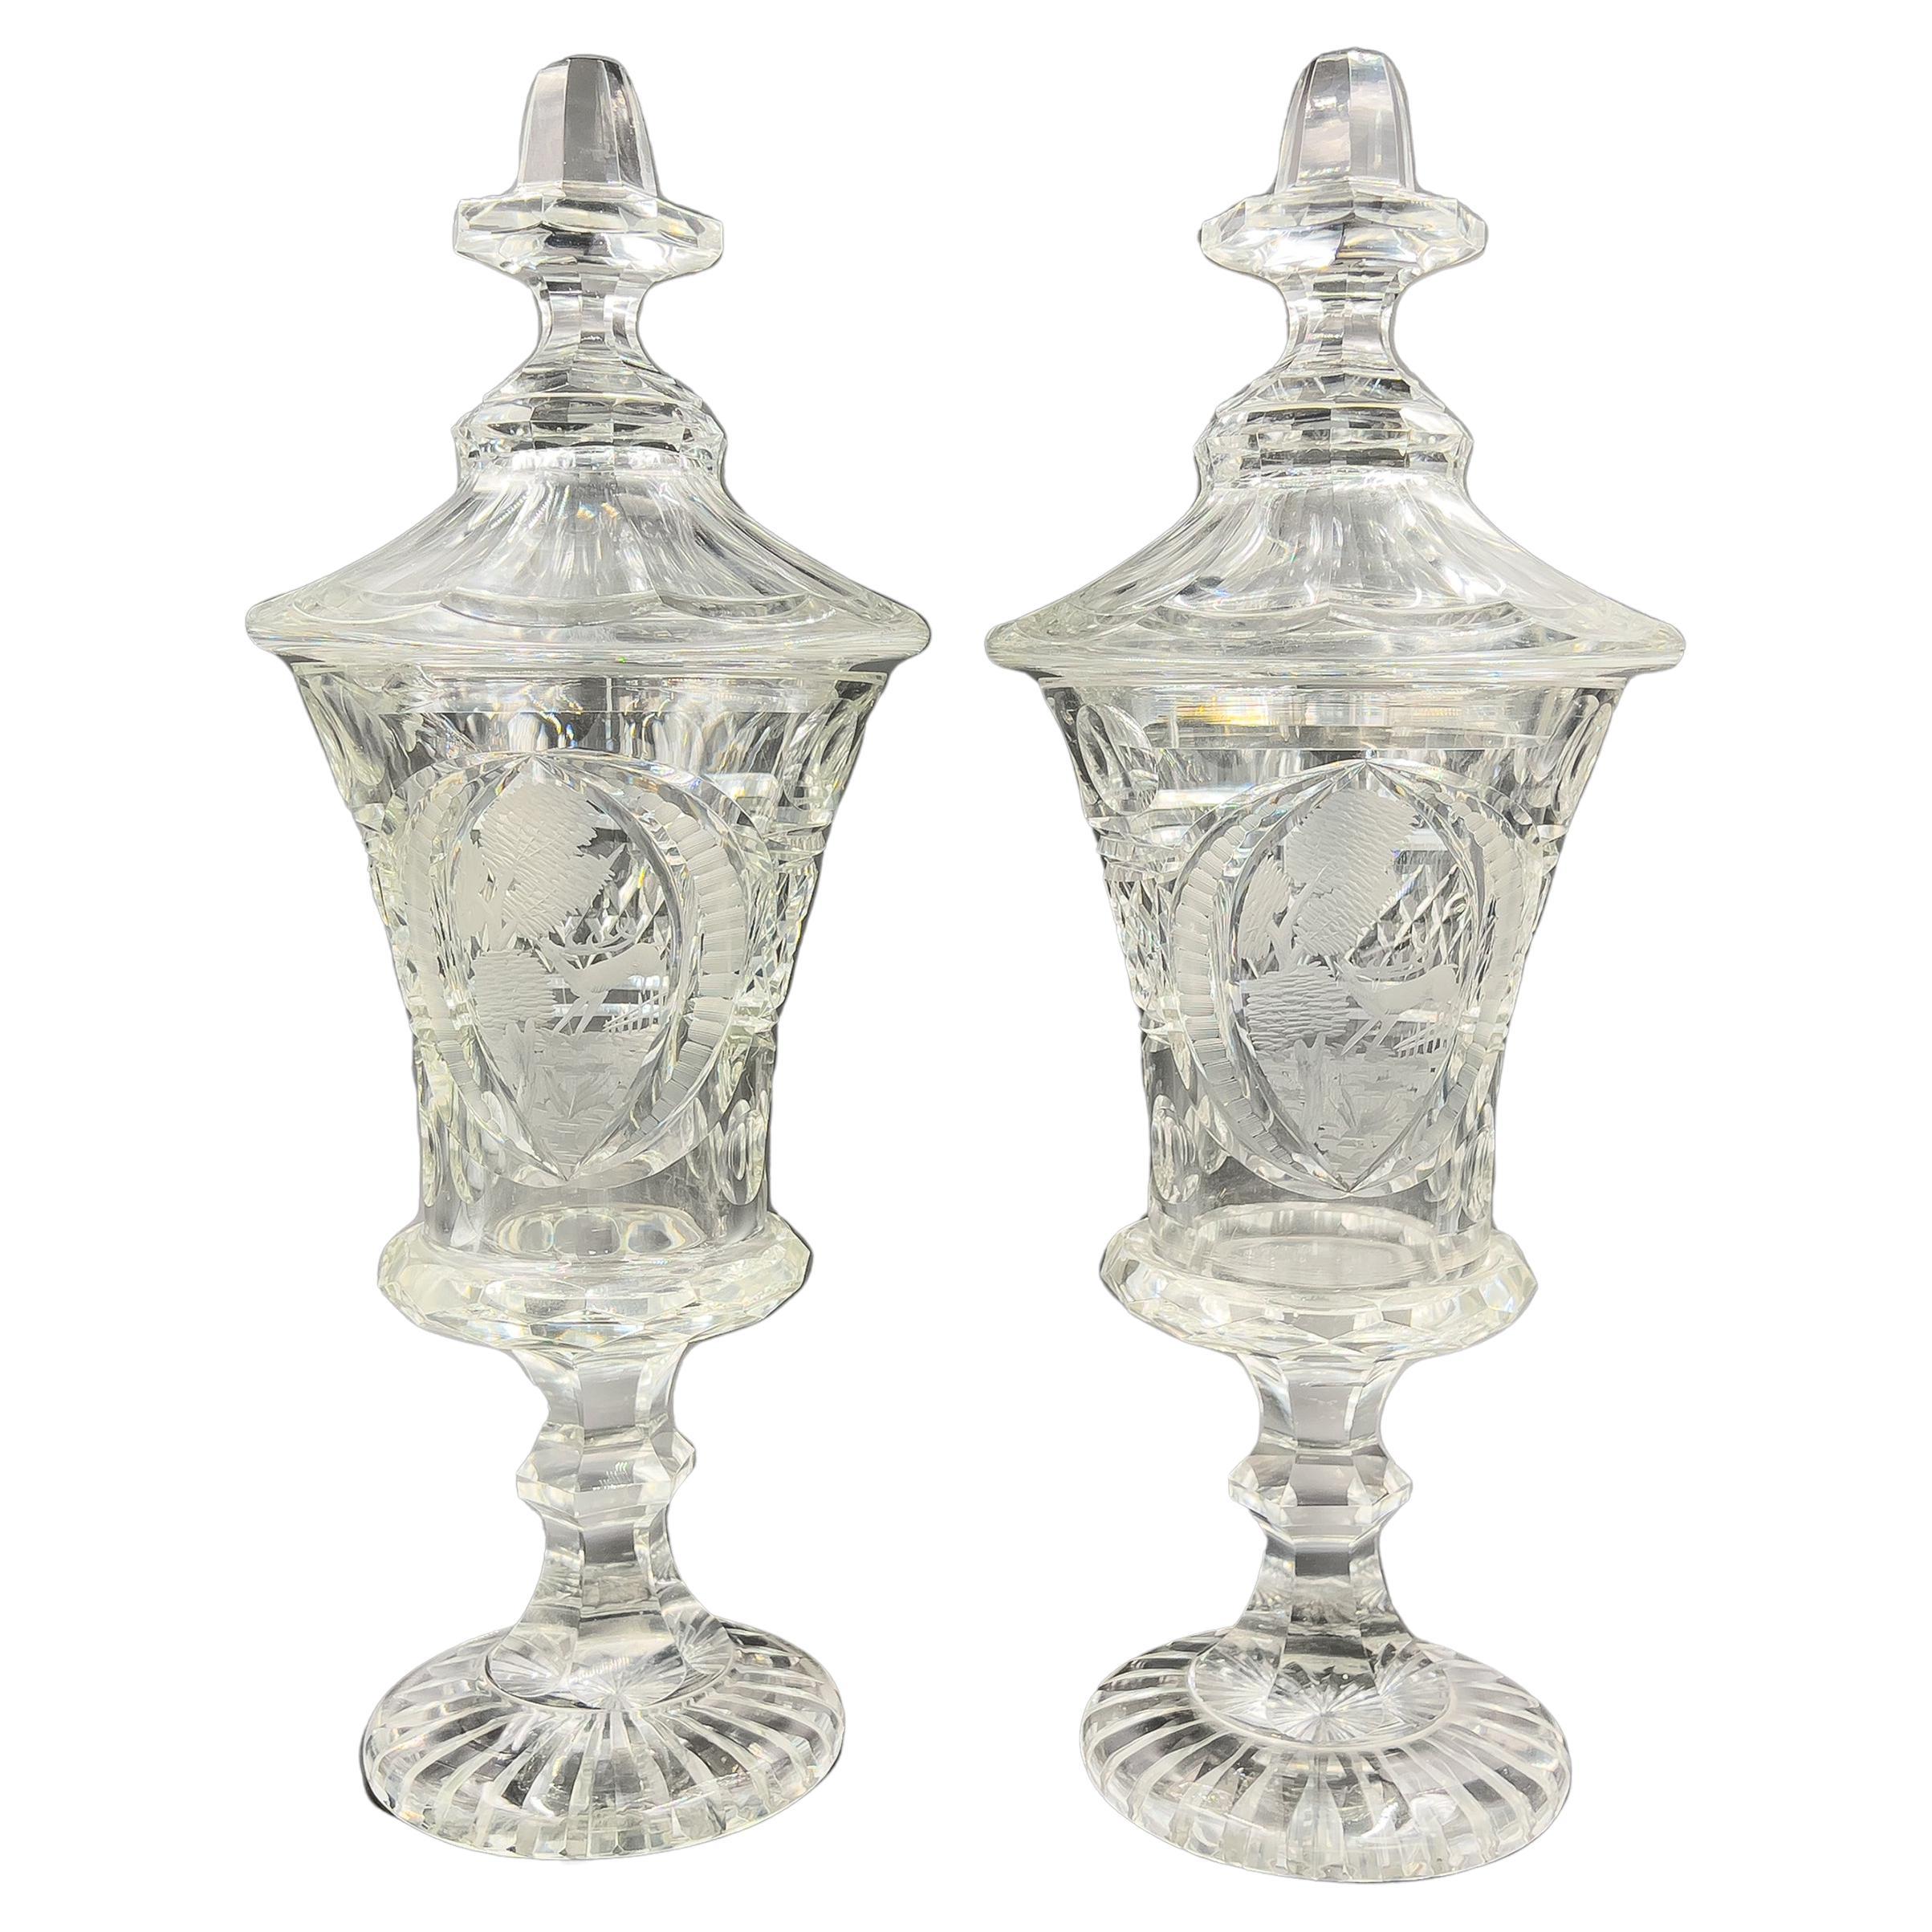 Fine Pair of Bohemian Cut and Etched Lidded Glass Vases, Late 19th/Early 20th  For Sale